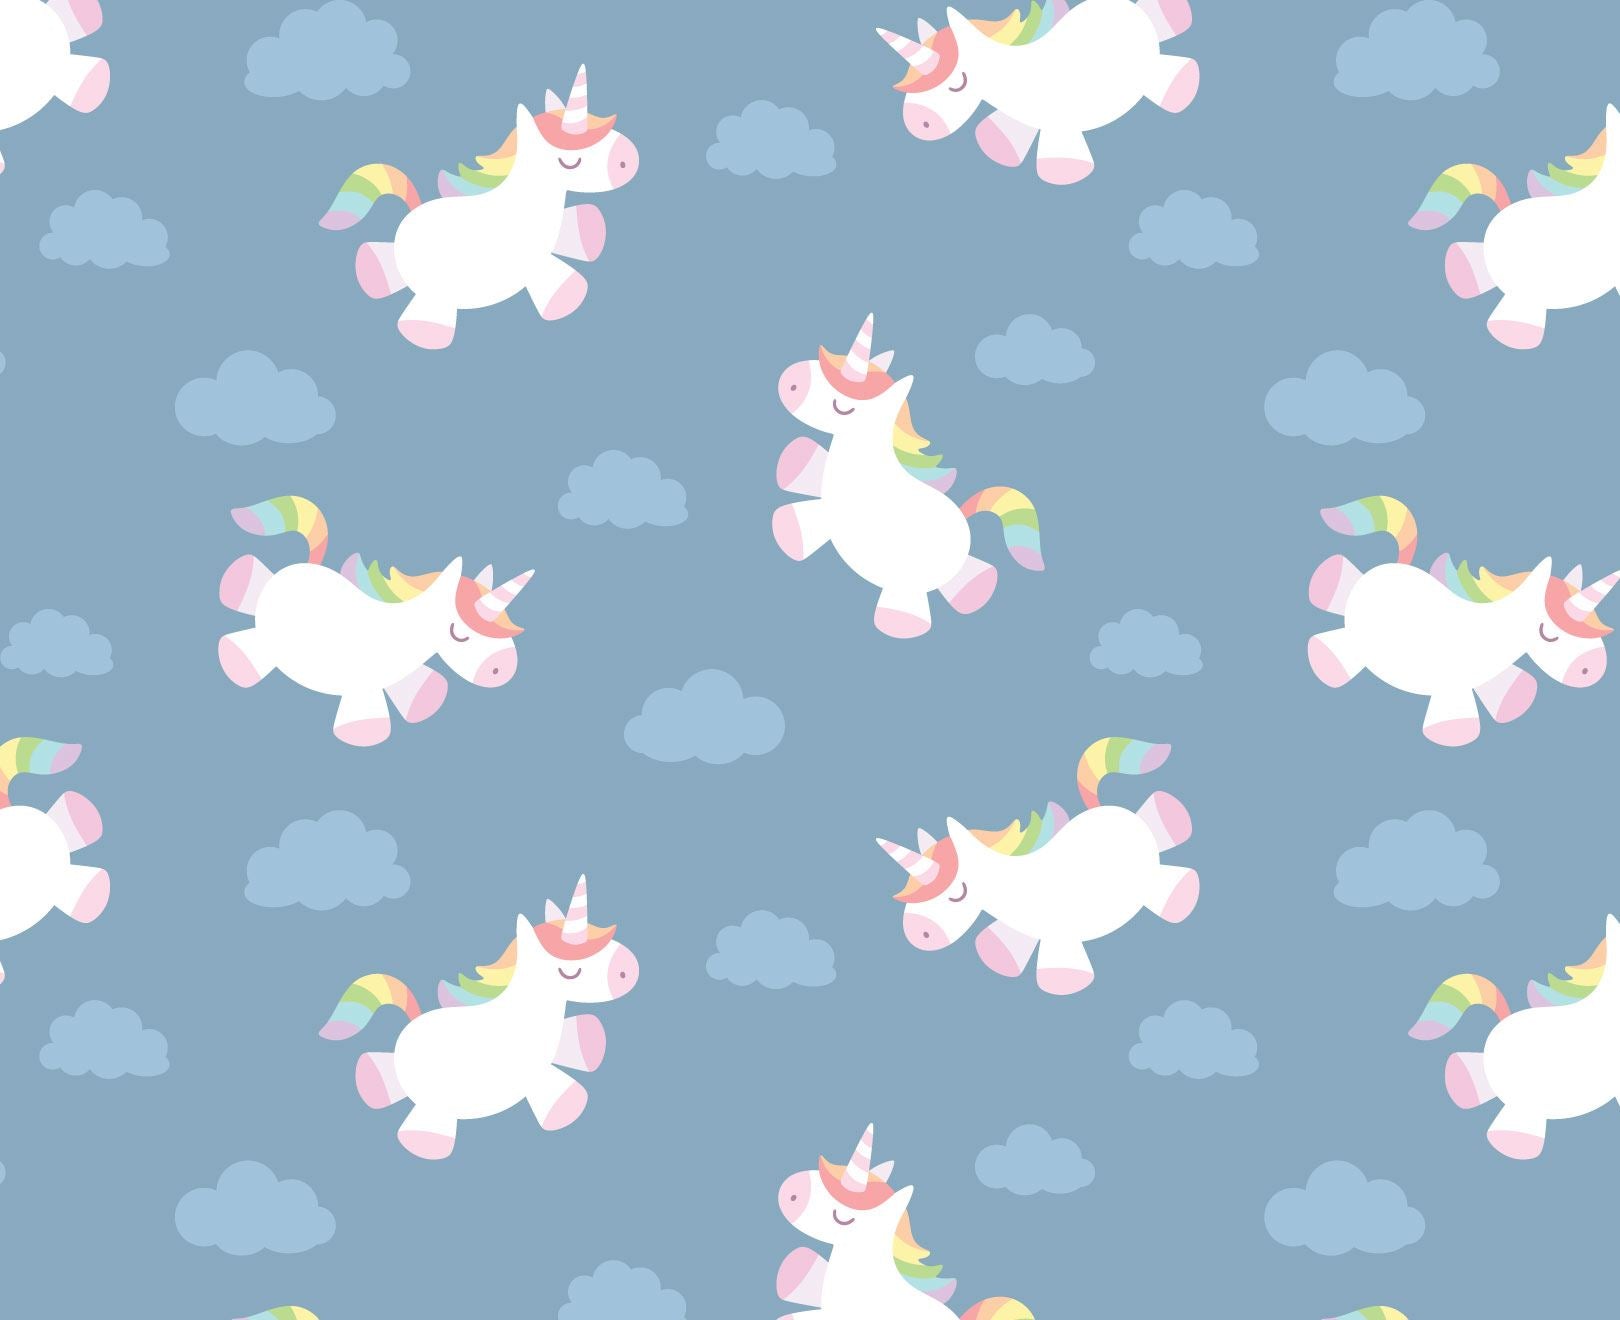 Flying Chubby Unicorn Wallpaper. Kids and Childrens Wall Murals and Wallpaper Sticker Boy